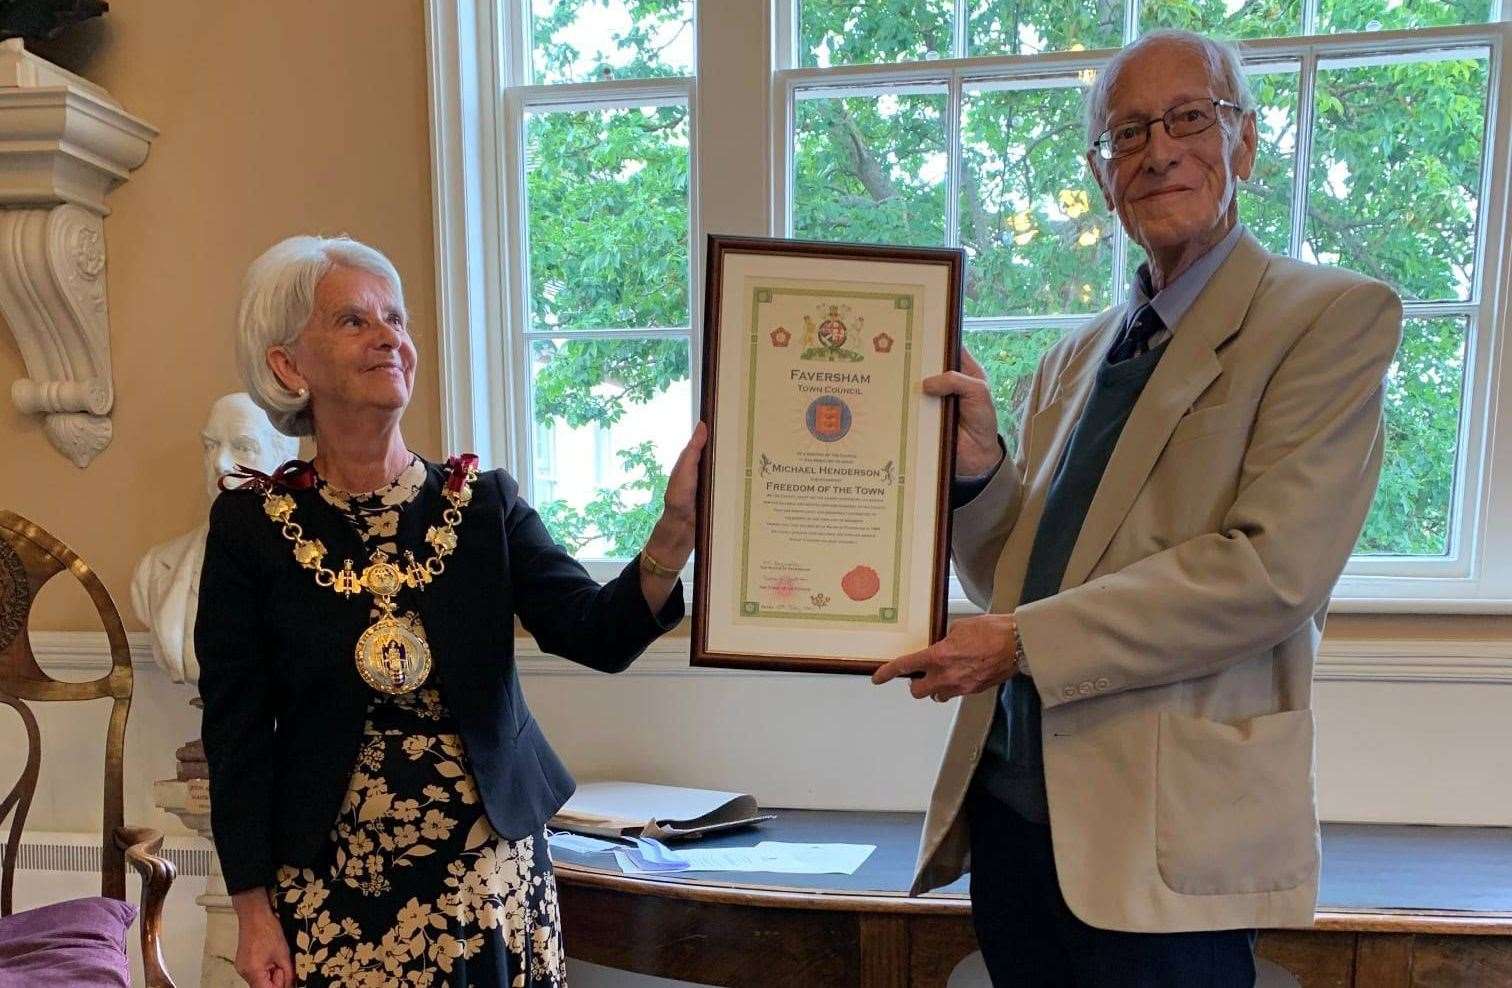 He was given the Freedom of Faversham in 2021